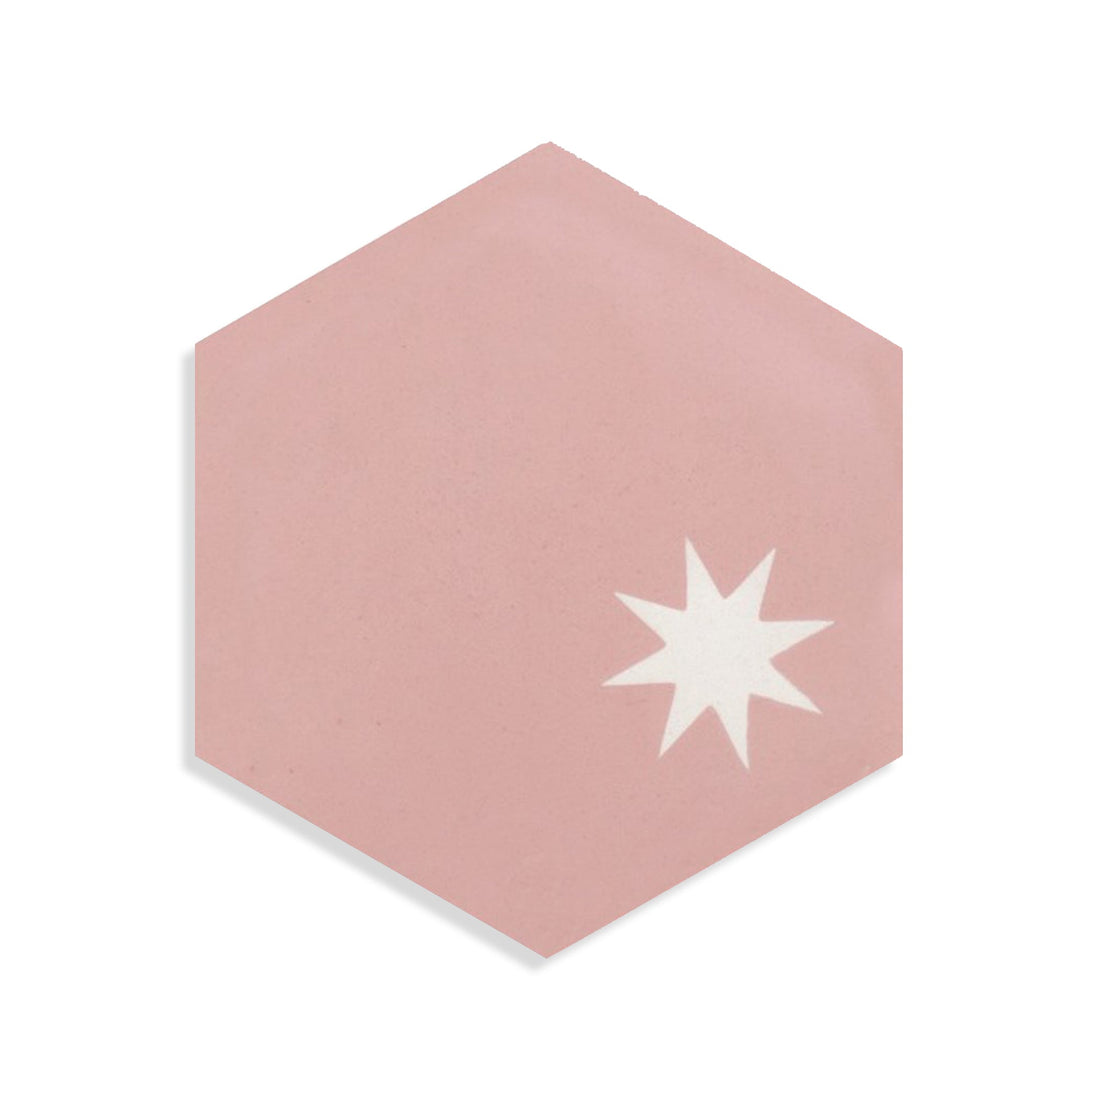 Moroccan Encaustic Cement Hexagonal Small Star Offset Pink, 20 x 23cm - Tiles &amp; Stone To You